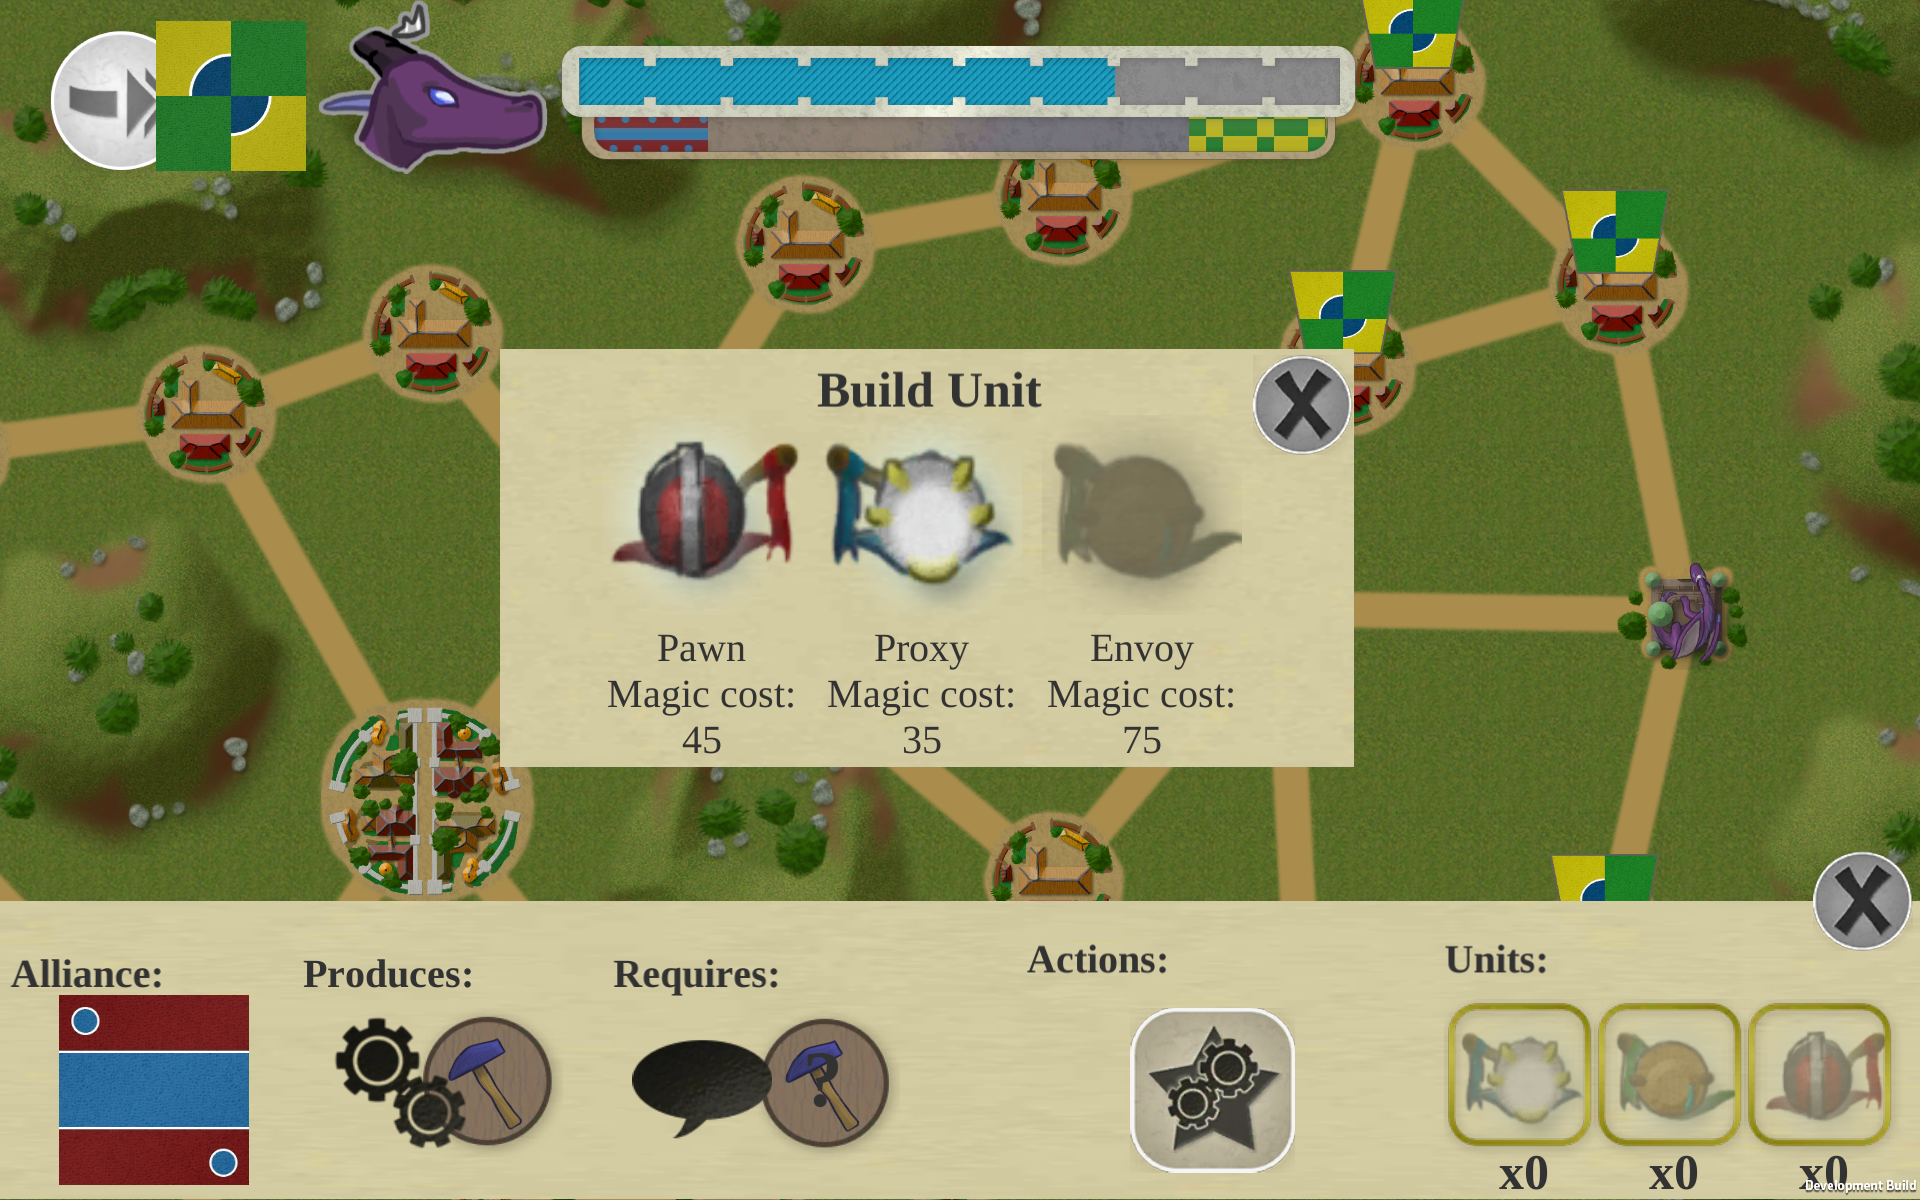 Screenshot of the prototype in progress, inviting the player to invest magic in a new strategic unit: either a Pawn or a Proxy.